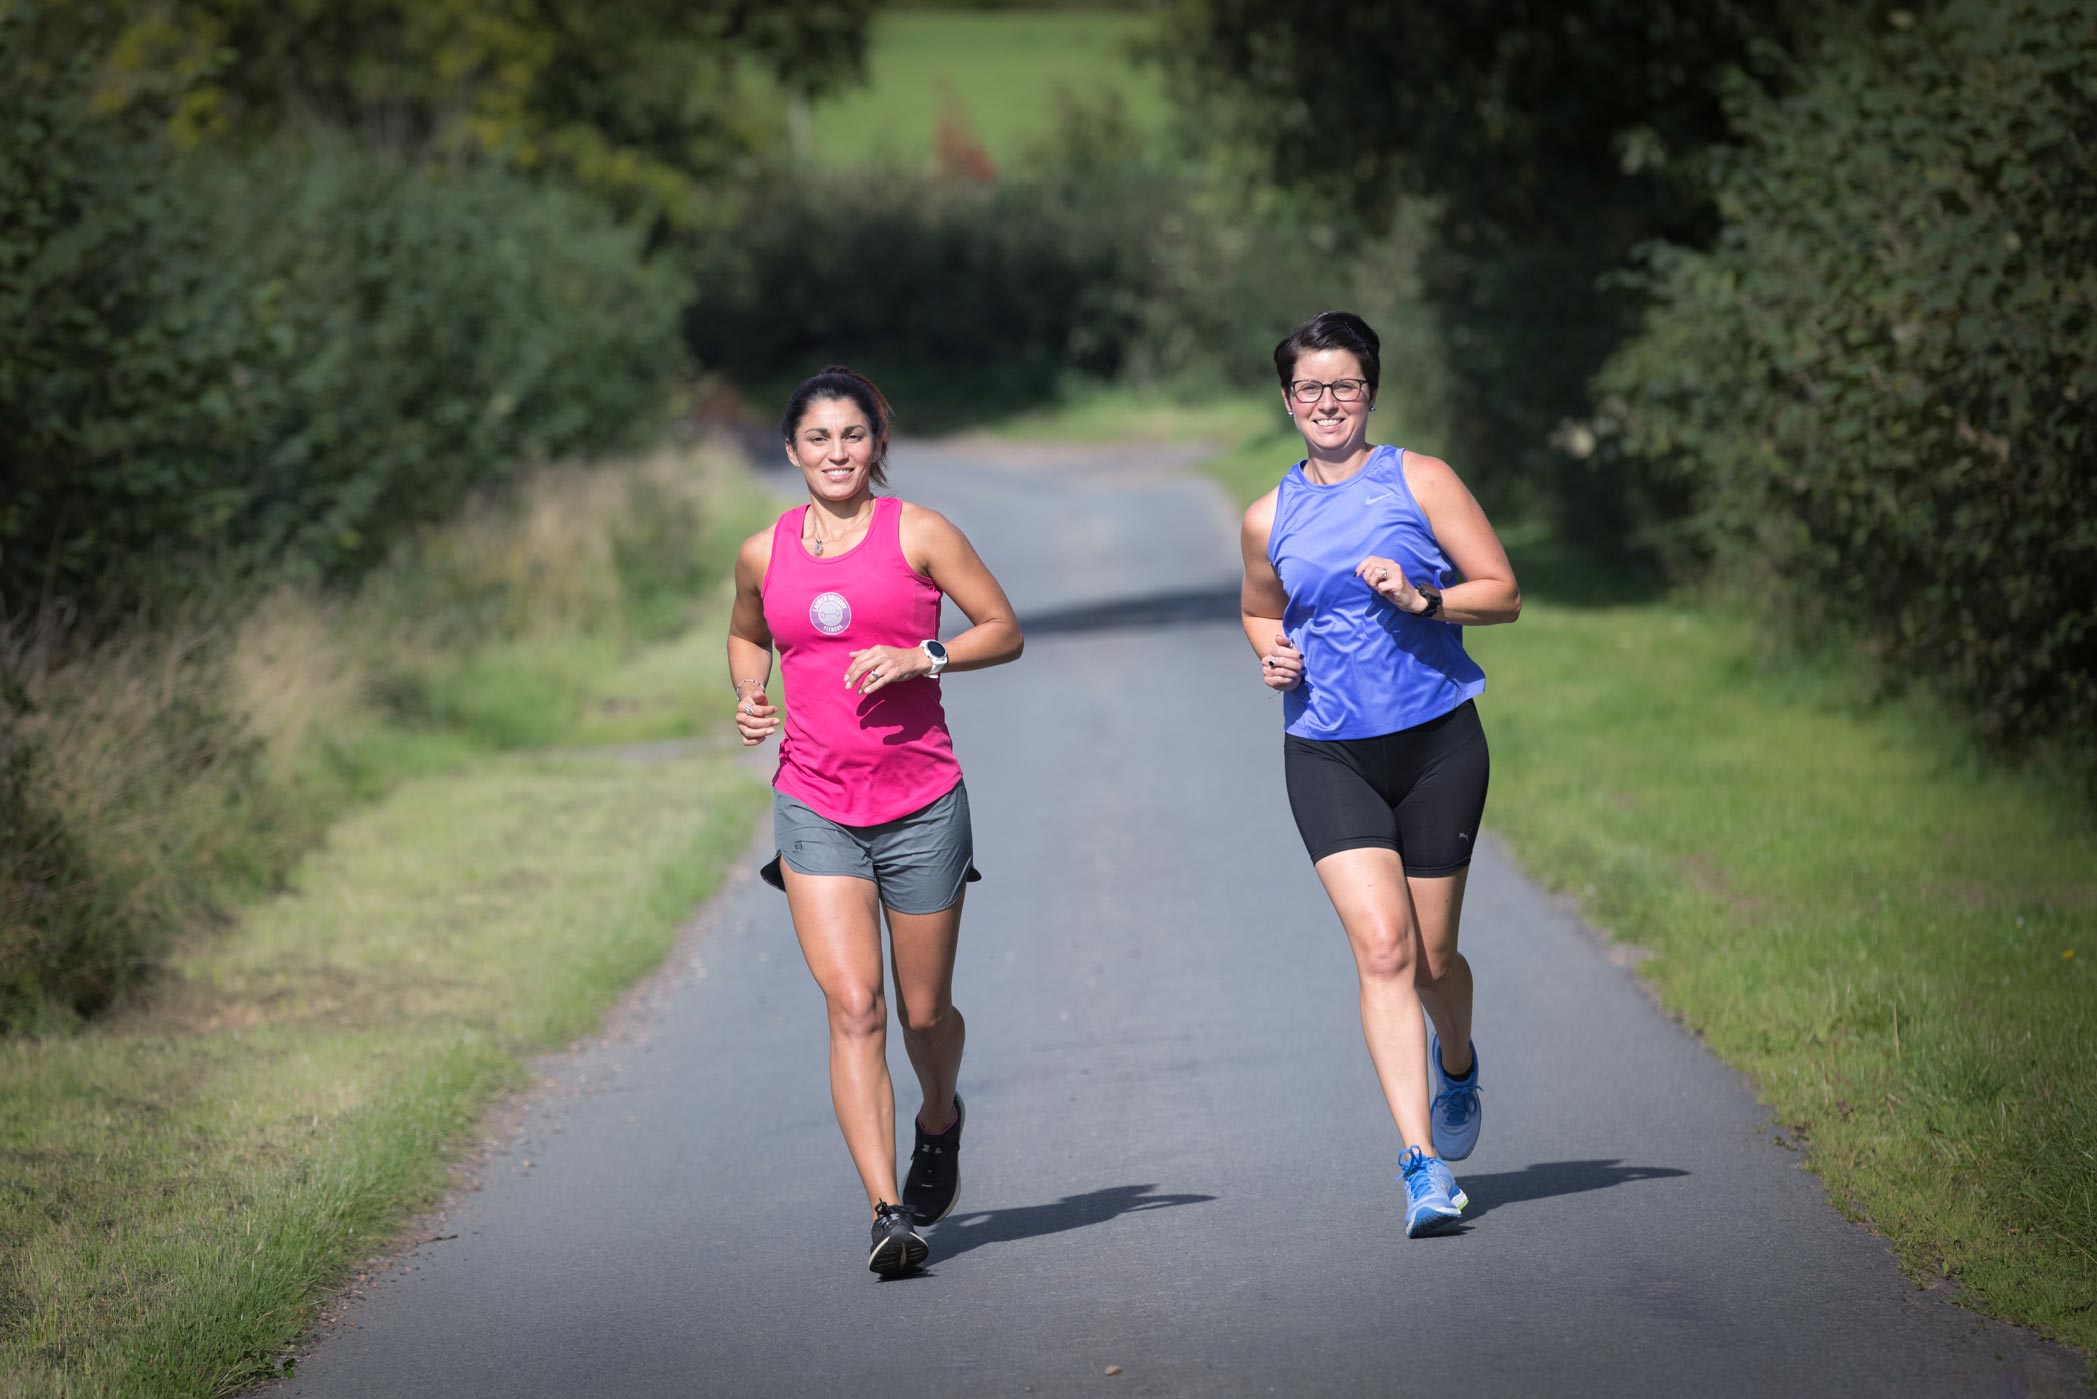 A running coach runs with her client along a country road during a health & fitness personal branding photography shoot in Warrickshire